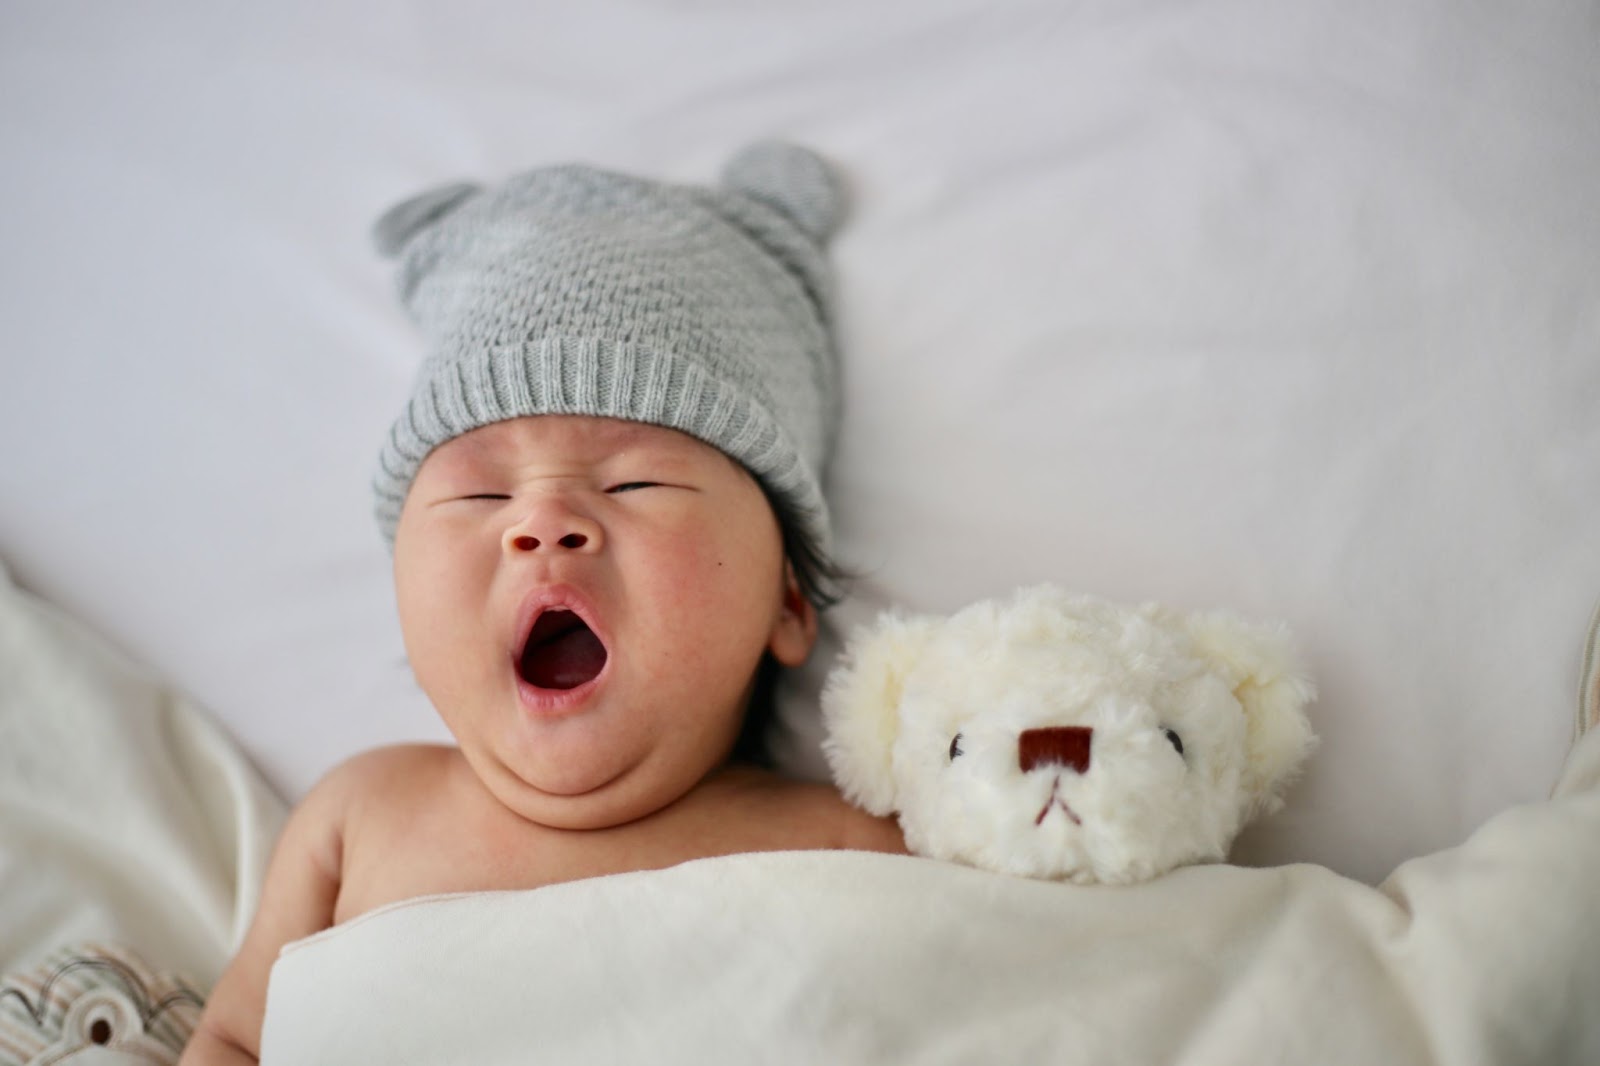 An infant yawning in a bed with a teddy bear